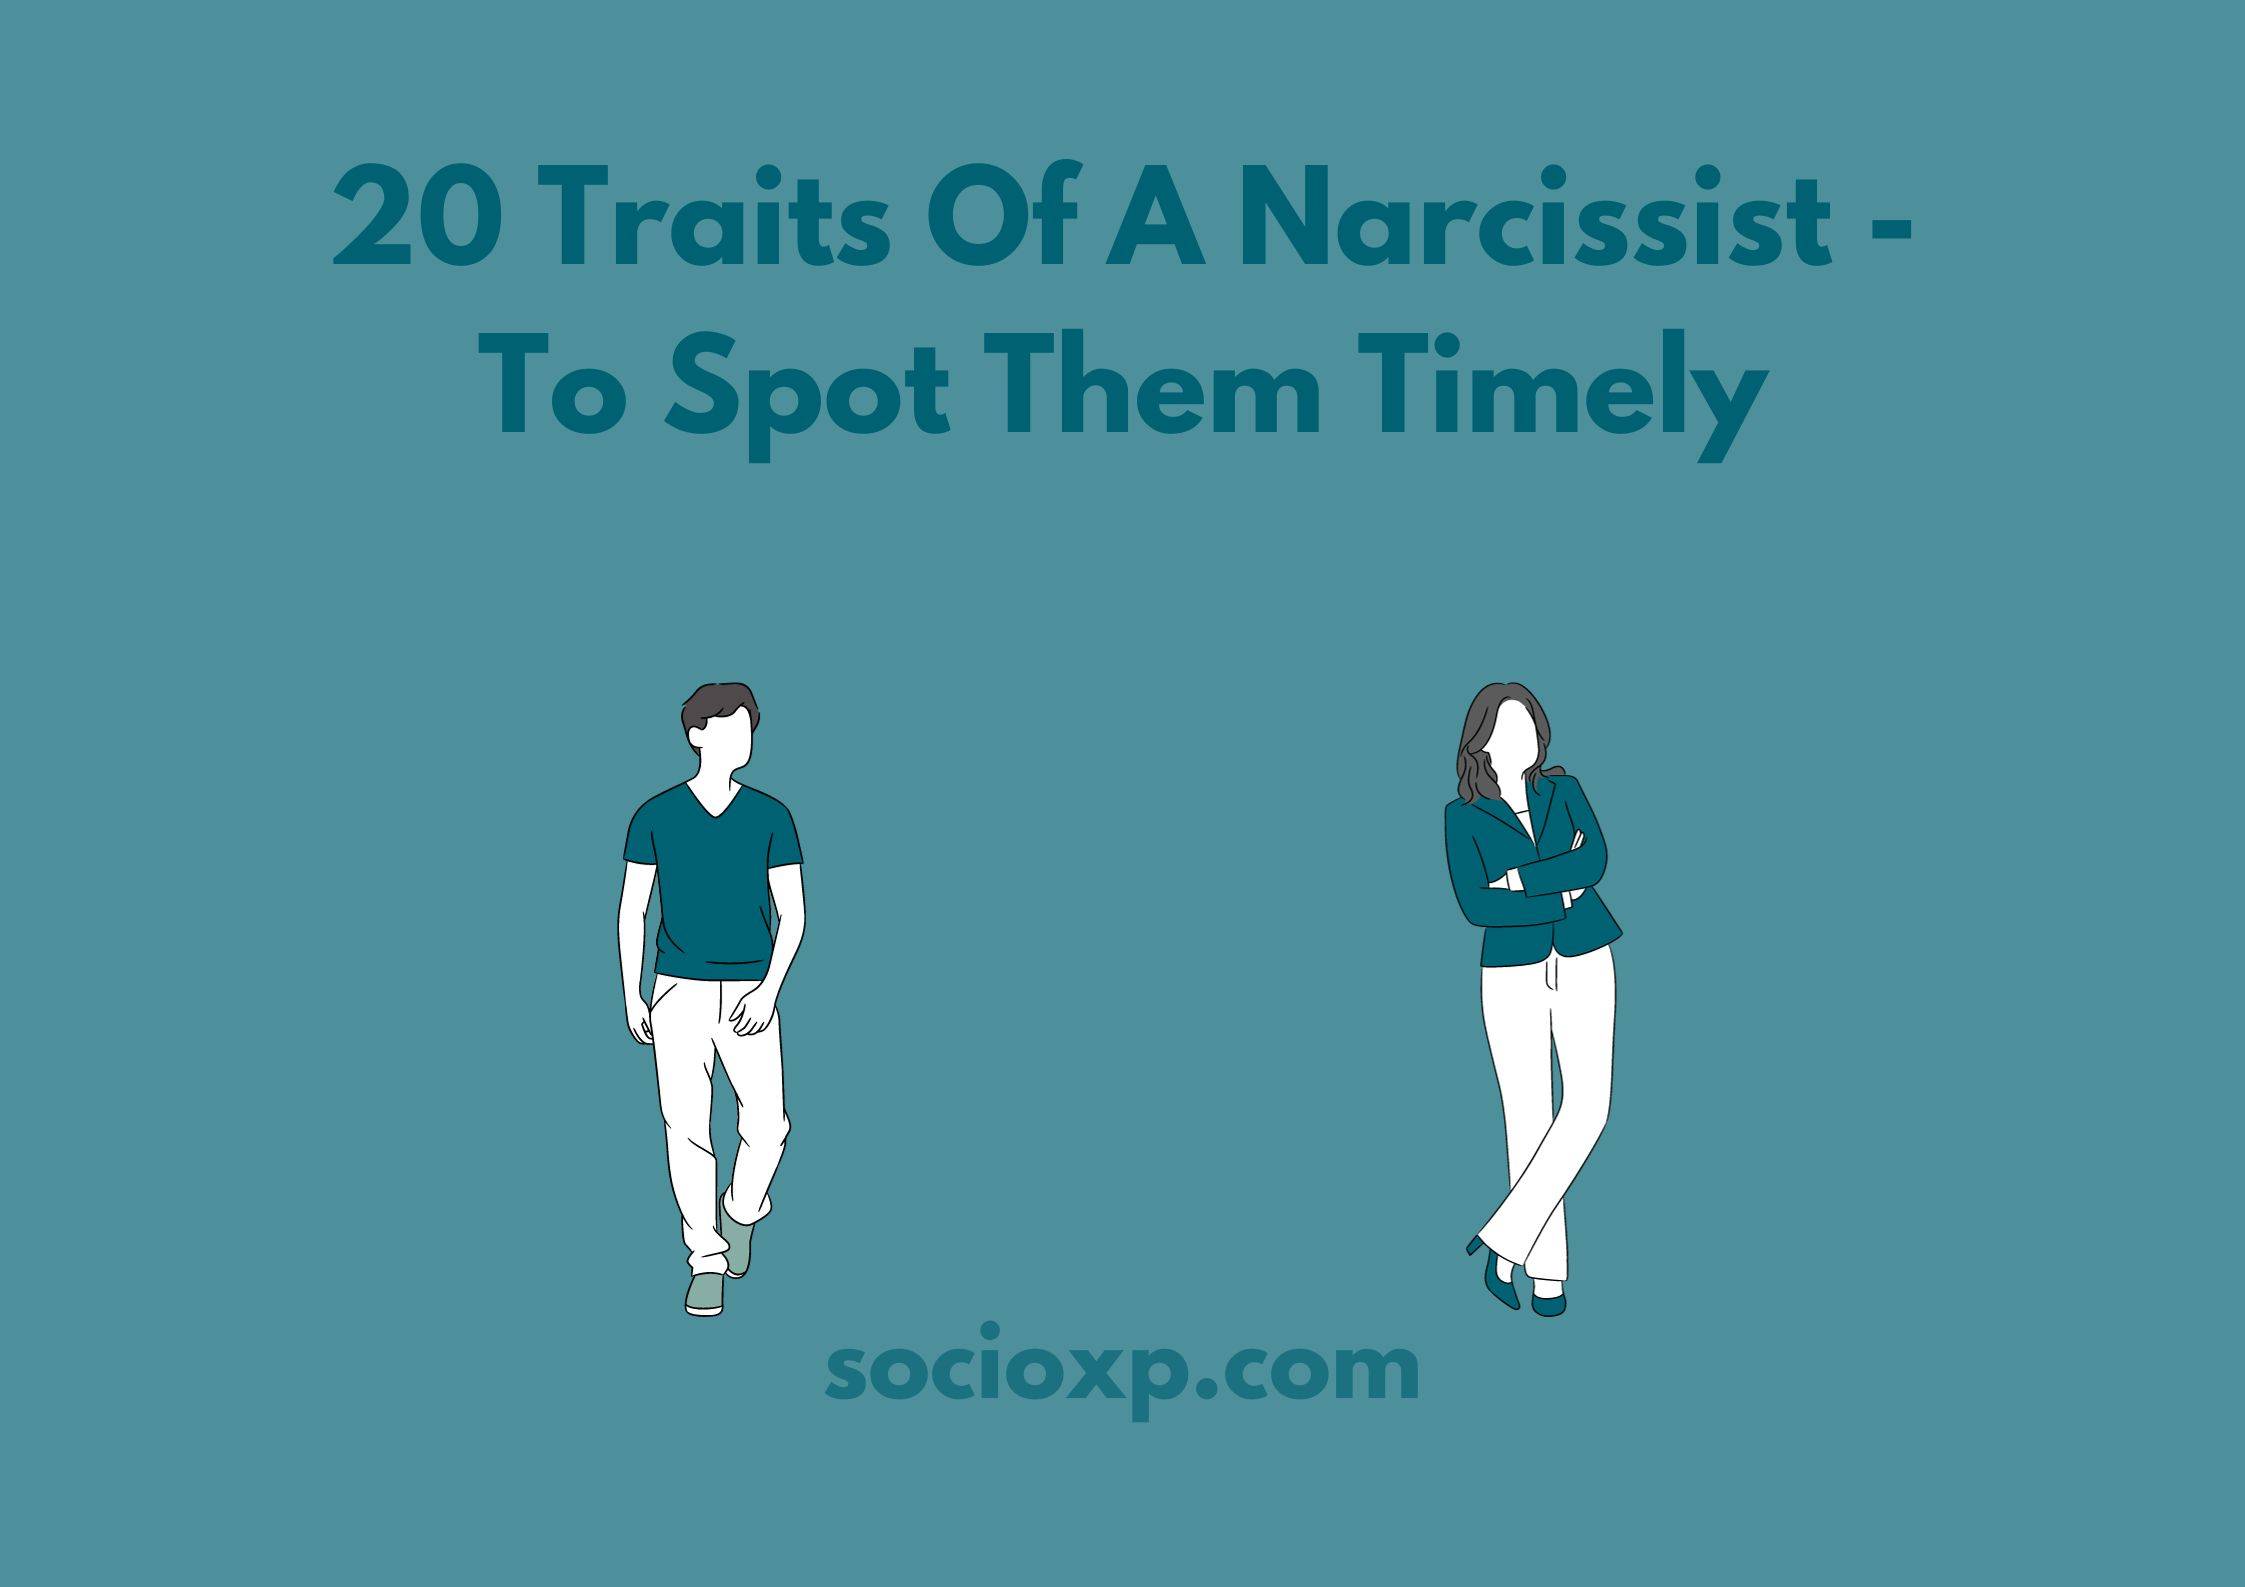 20 Traits Of A Narcissist - To Spot Them Timely